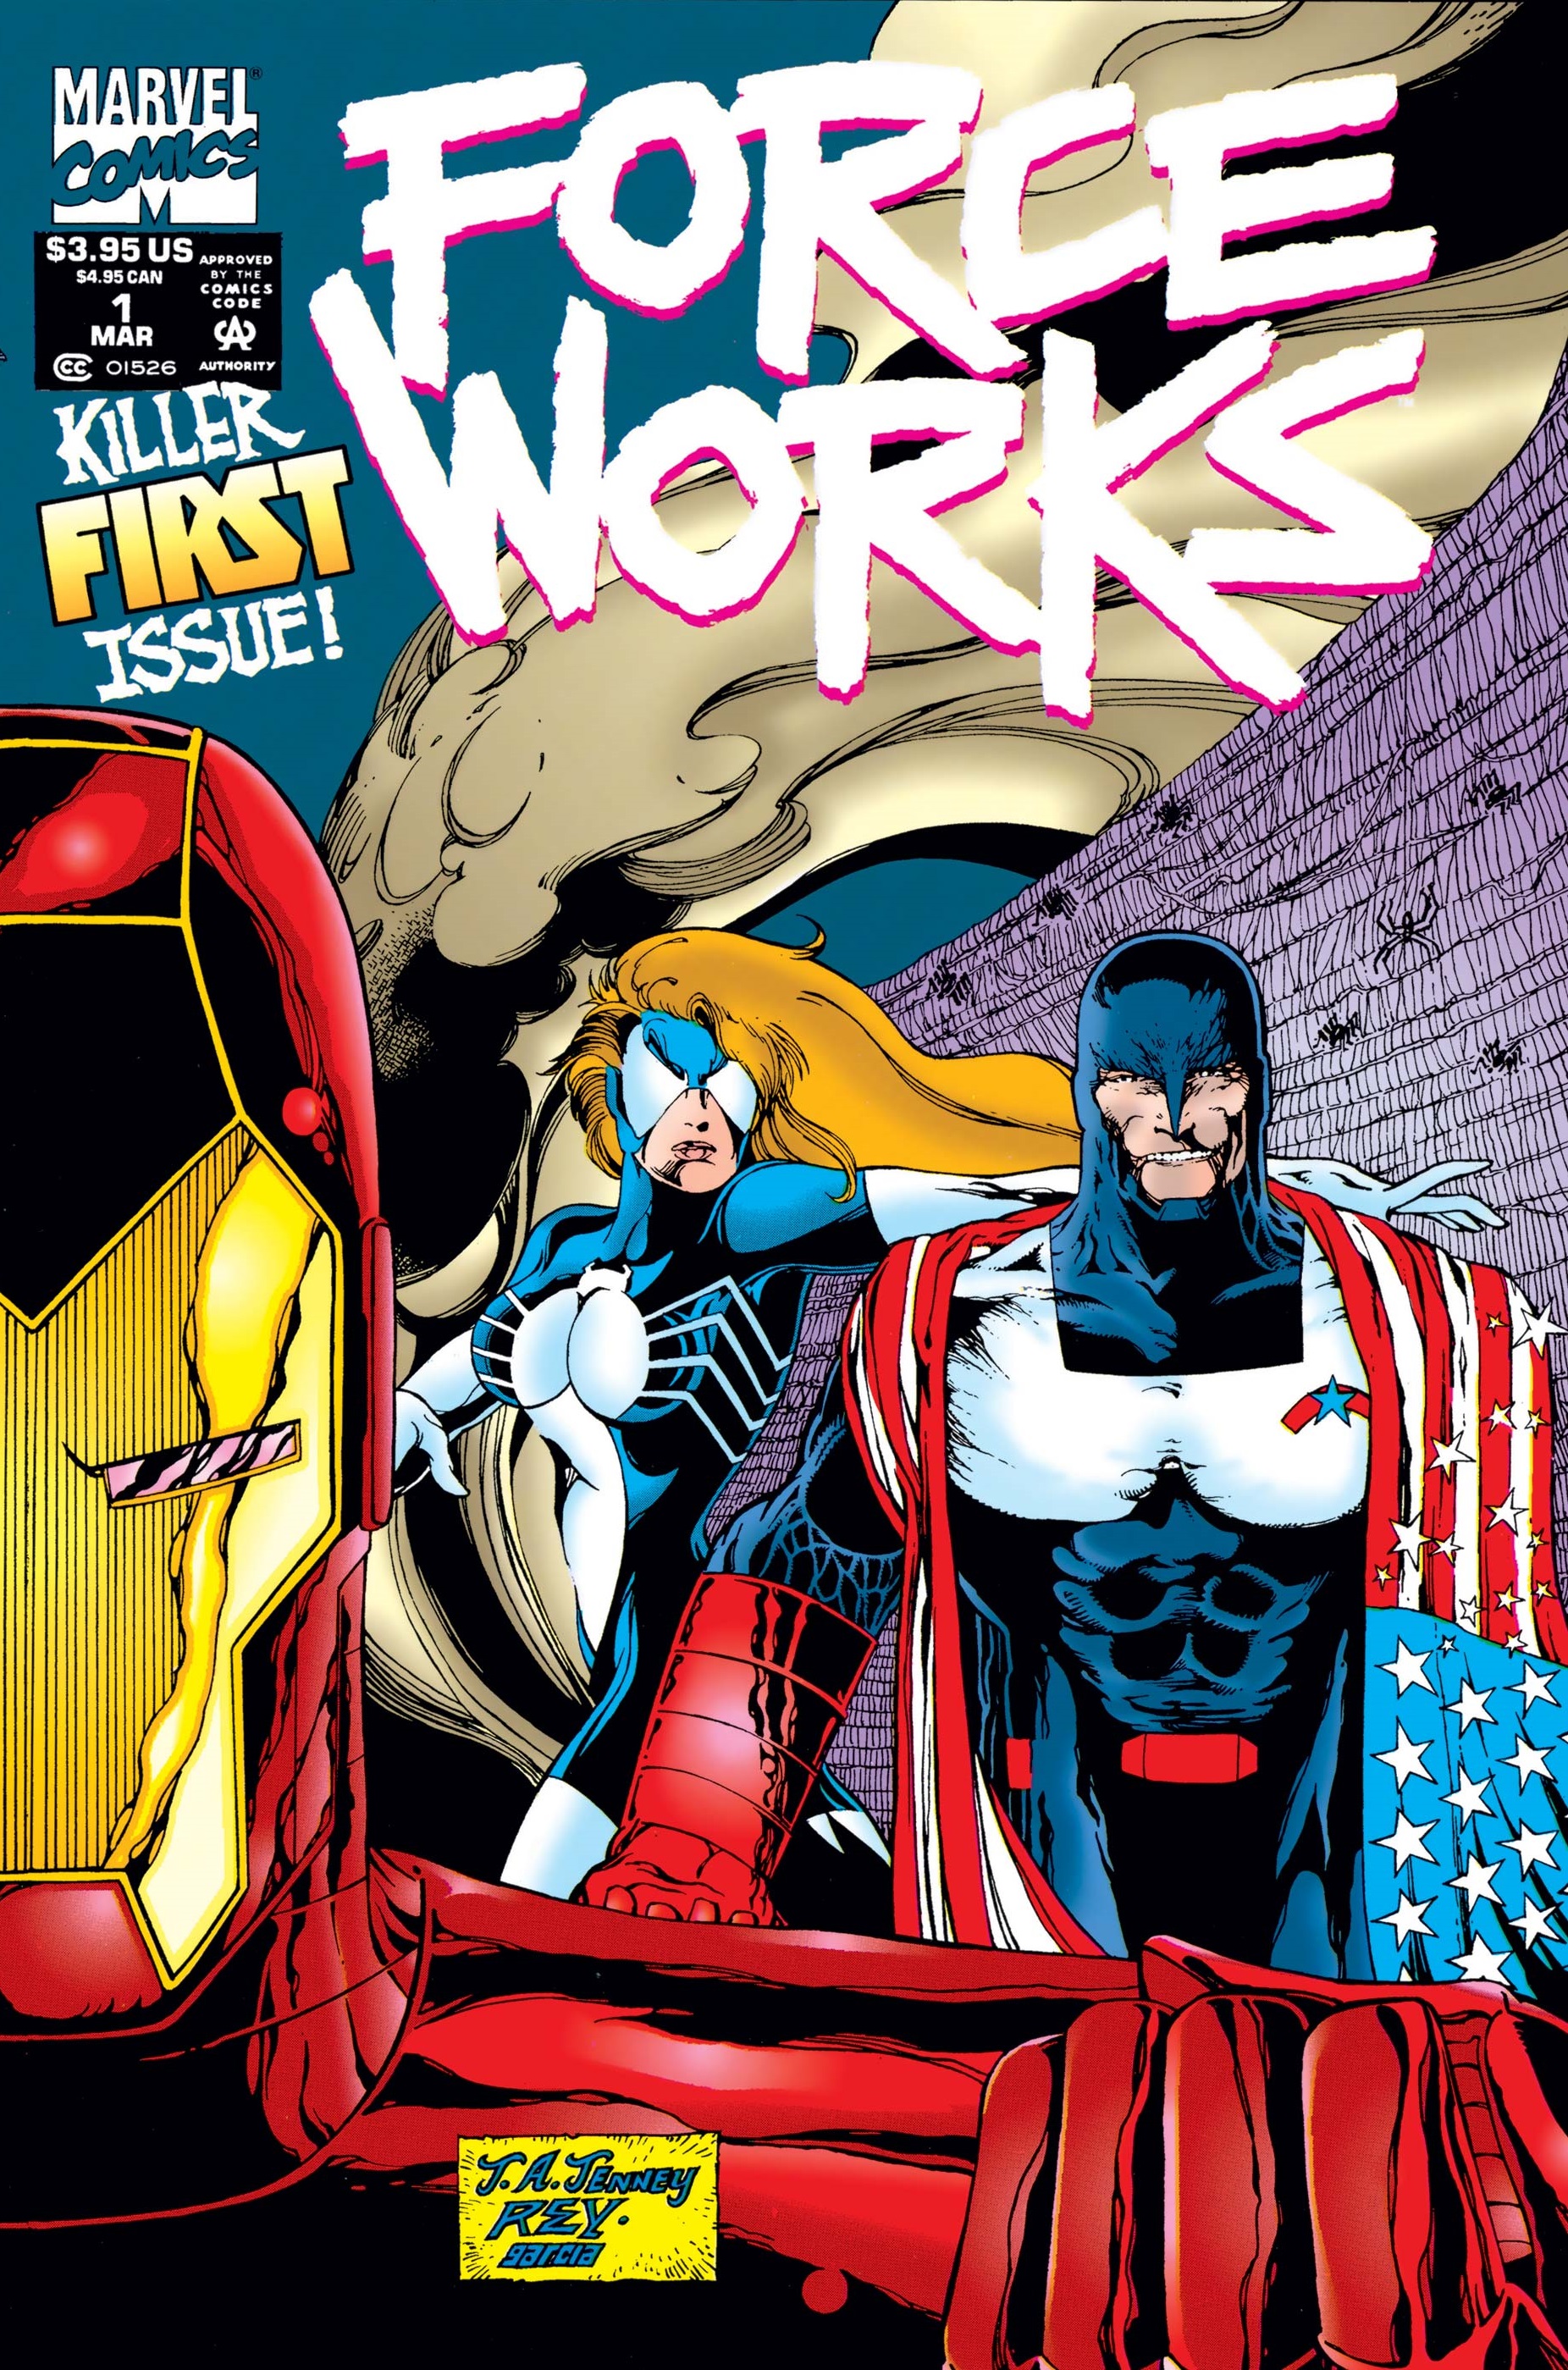 Force Works (1994) #1